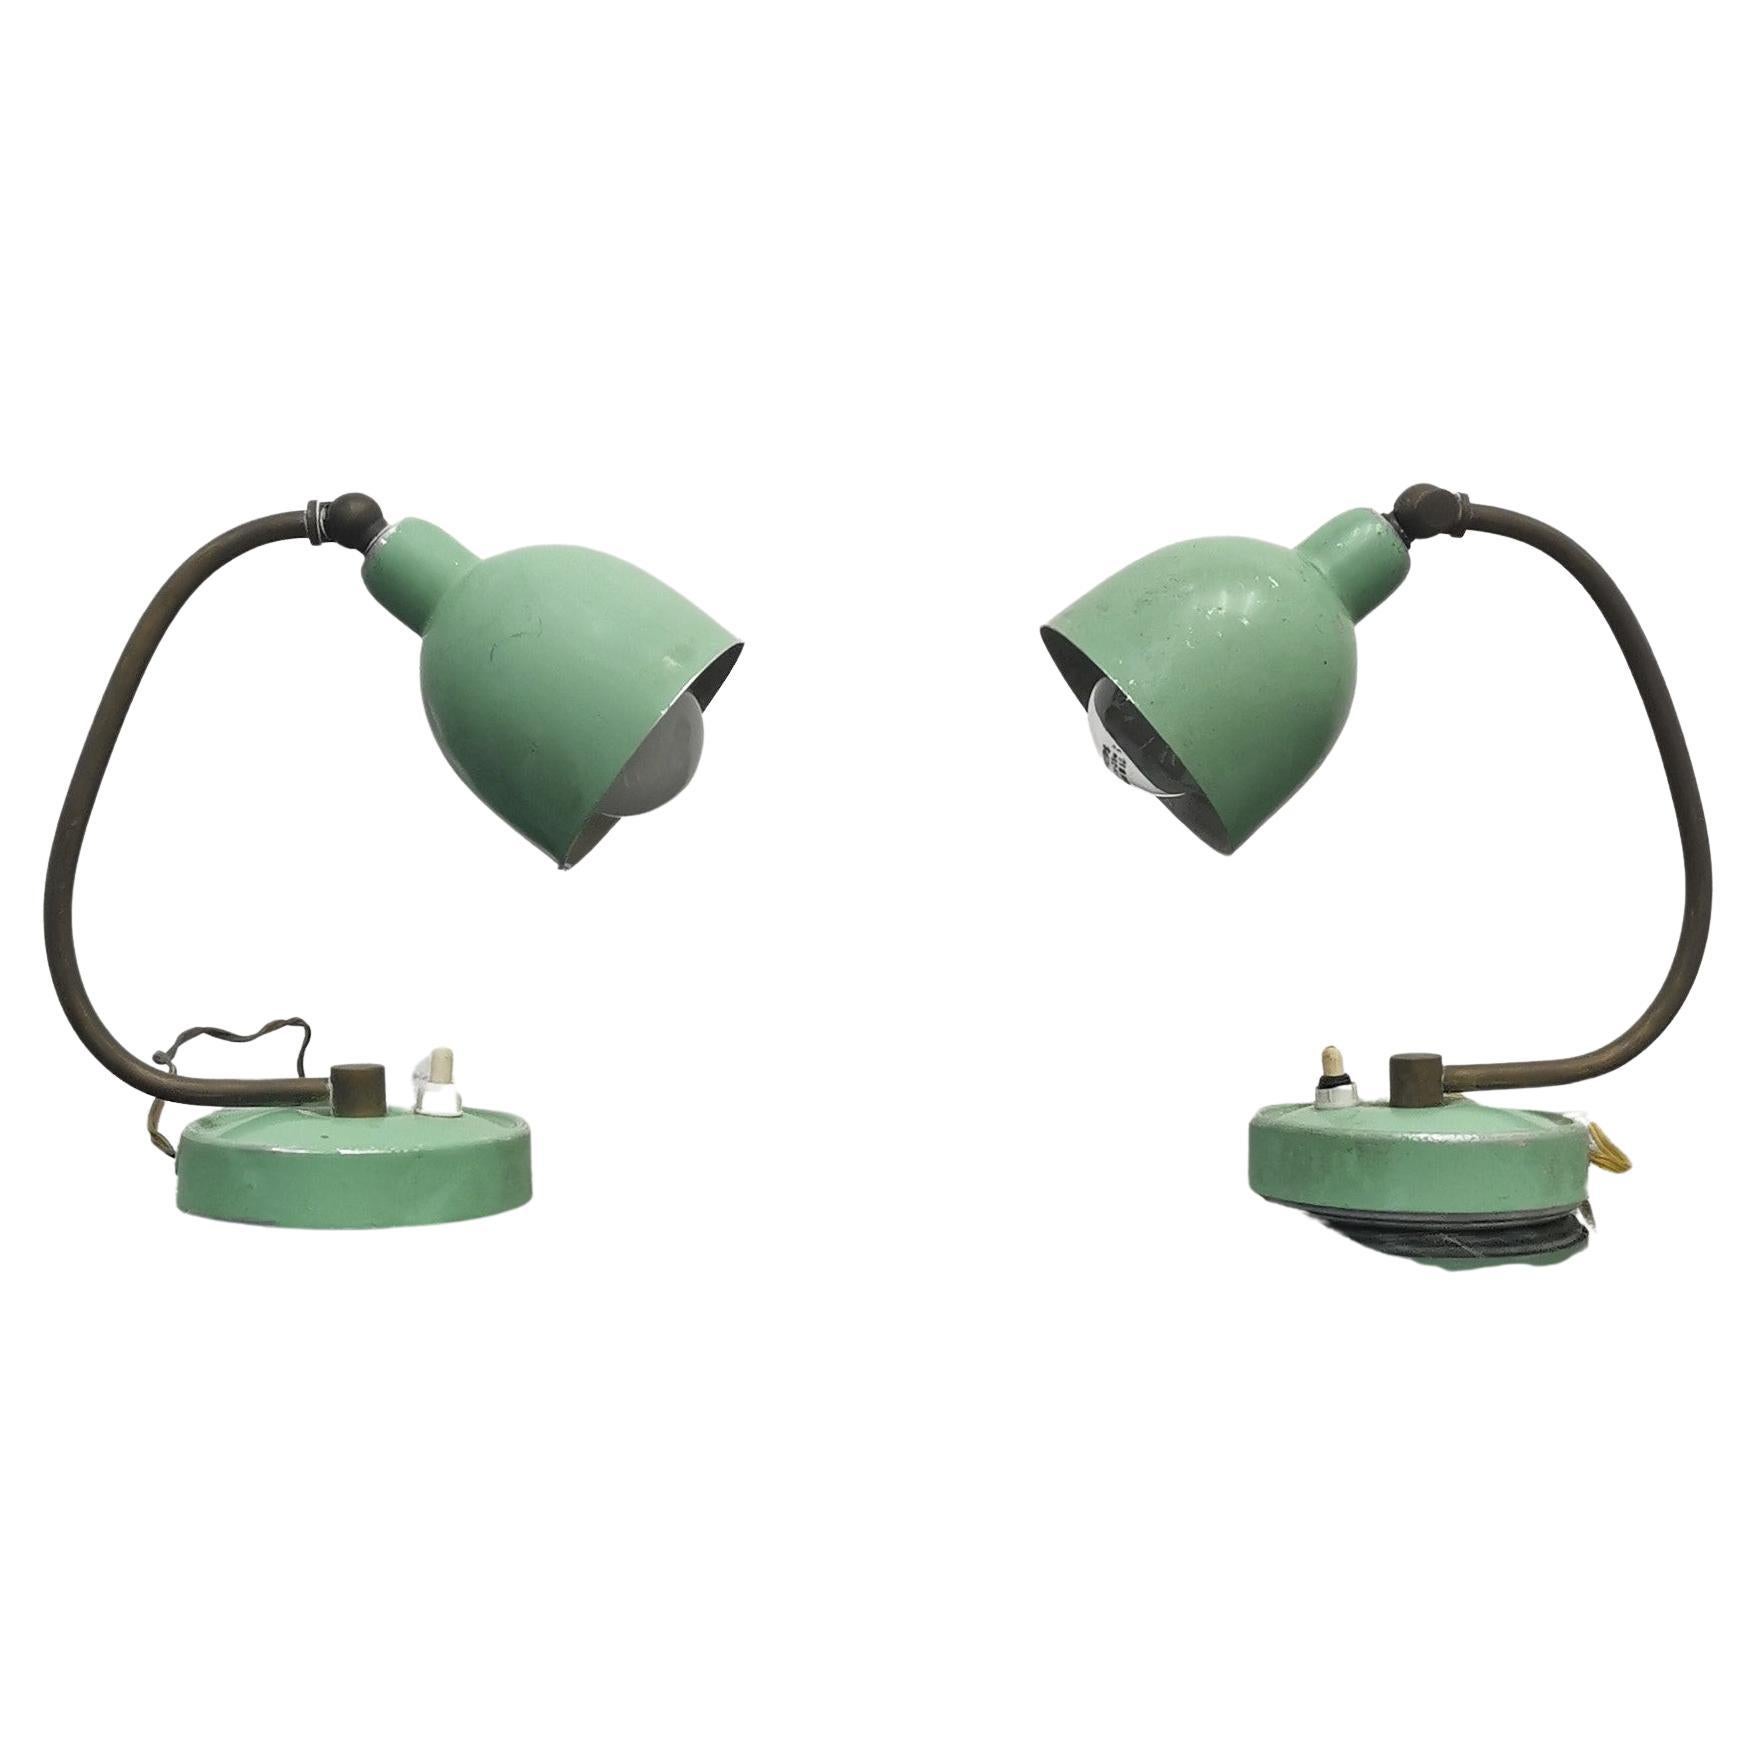 Pair of delightful adjustable table or desk lamps in light green lacquered metal, with rod in brass rod.
On / off button on the base. Attributed to Stilux Milan, 1950s, Italy.
Wear consistent with age and use.